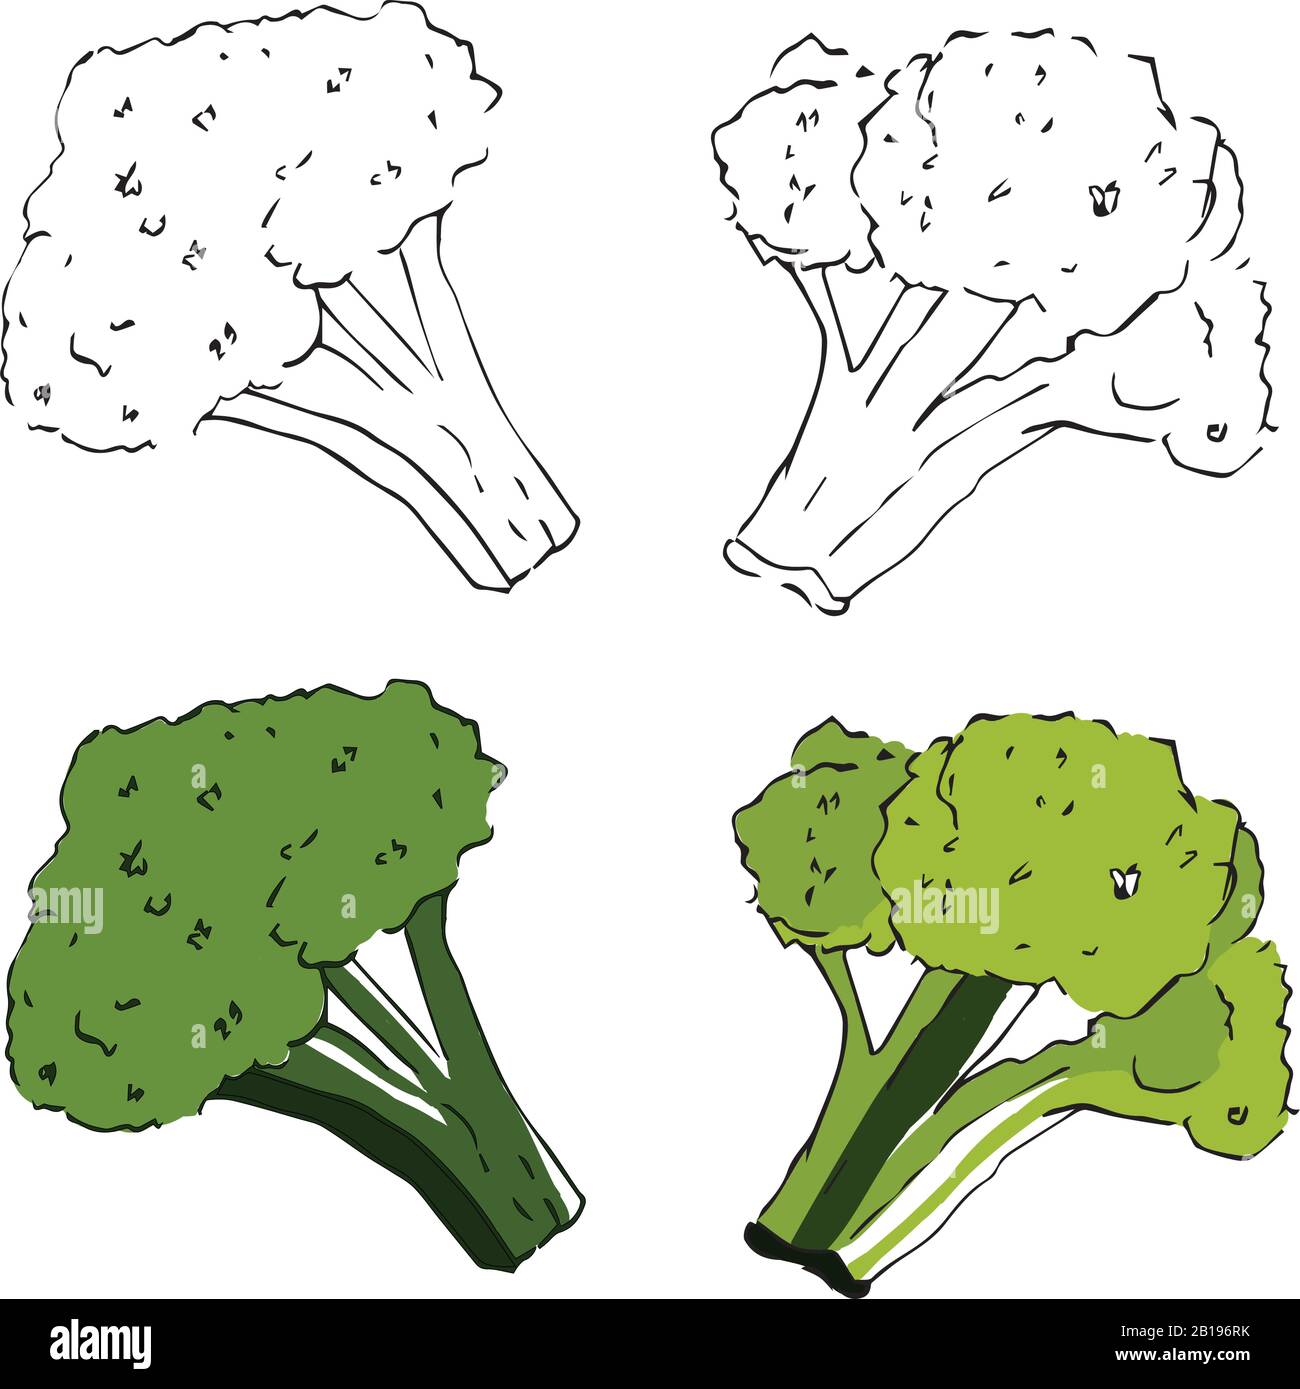 Green Leafy Vegetables Drawings for Sale - Fine Art America